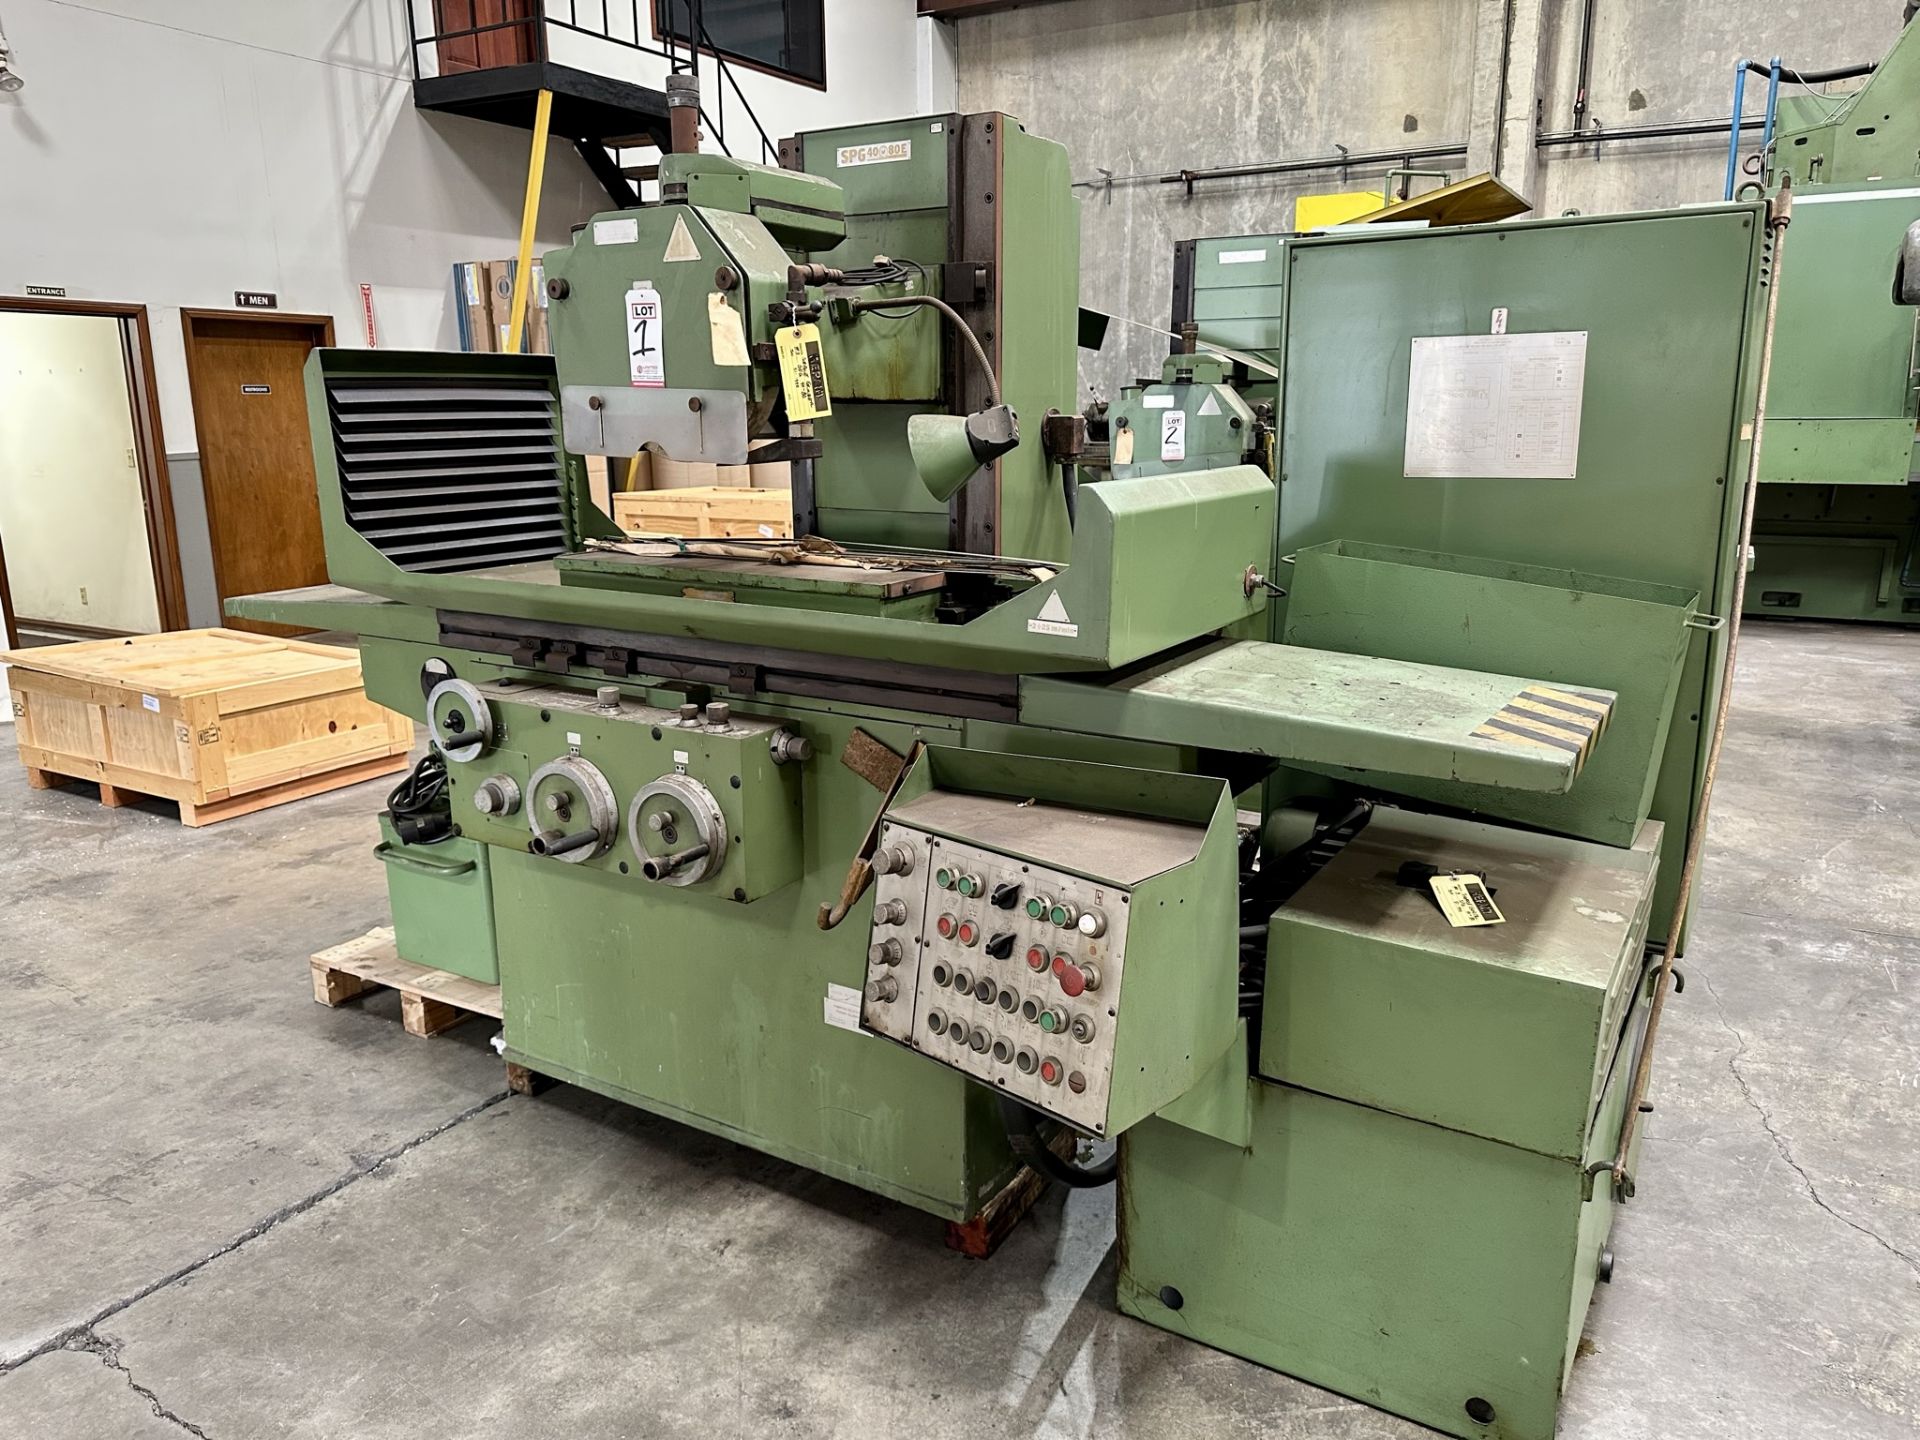 JOTES SURFACE GRINDER, FABRYKA SZLIFIEREK, TYPE SPG 40 X 80 E, 16" X 32" MAGNETIC CHUCK, S/N 51/ - Image 3 of 15